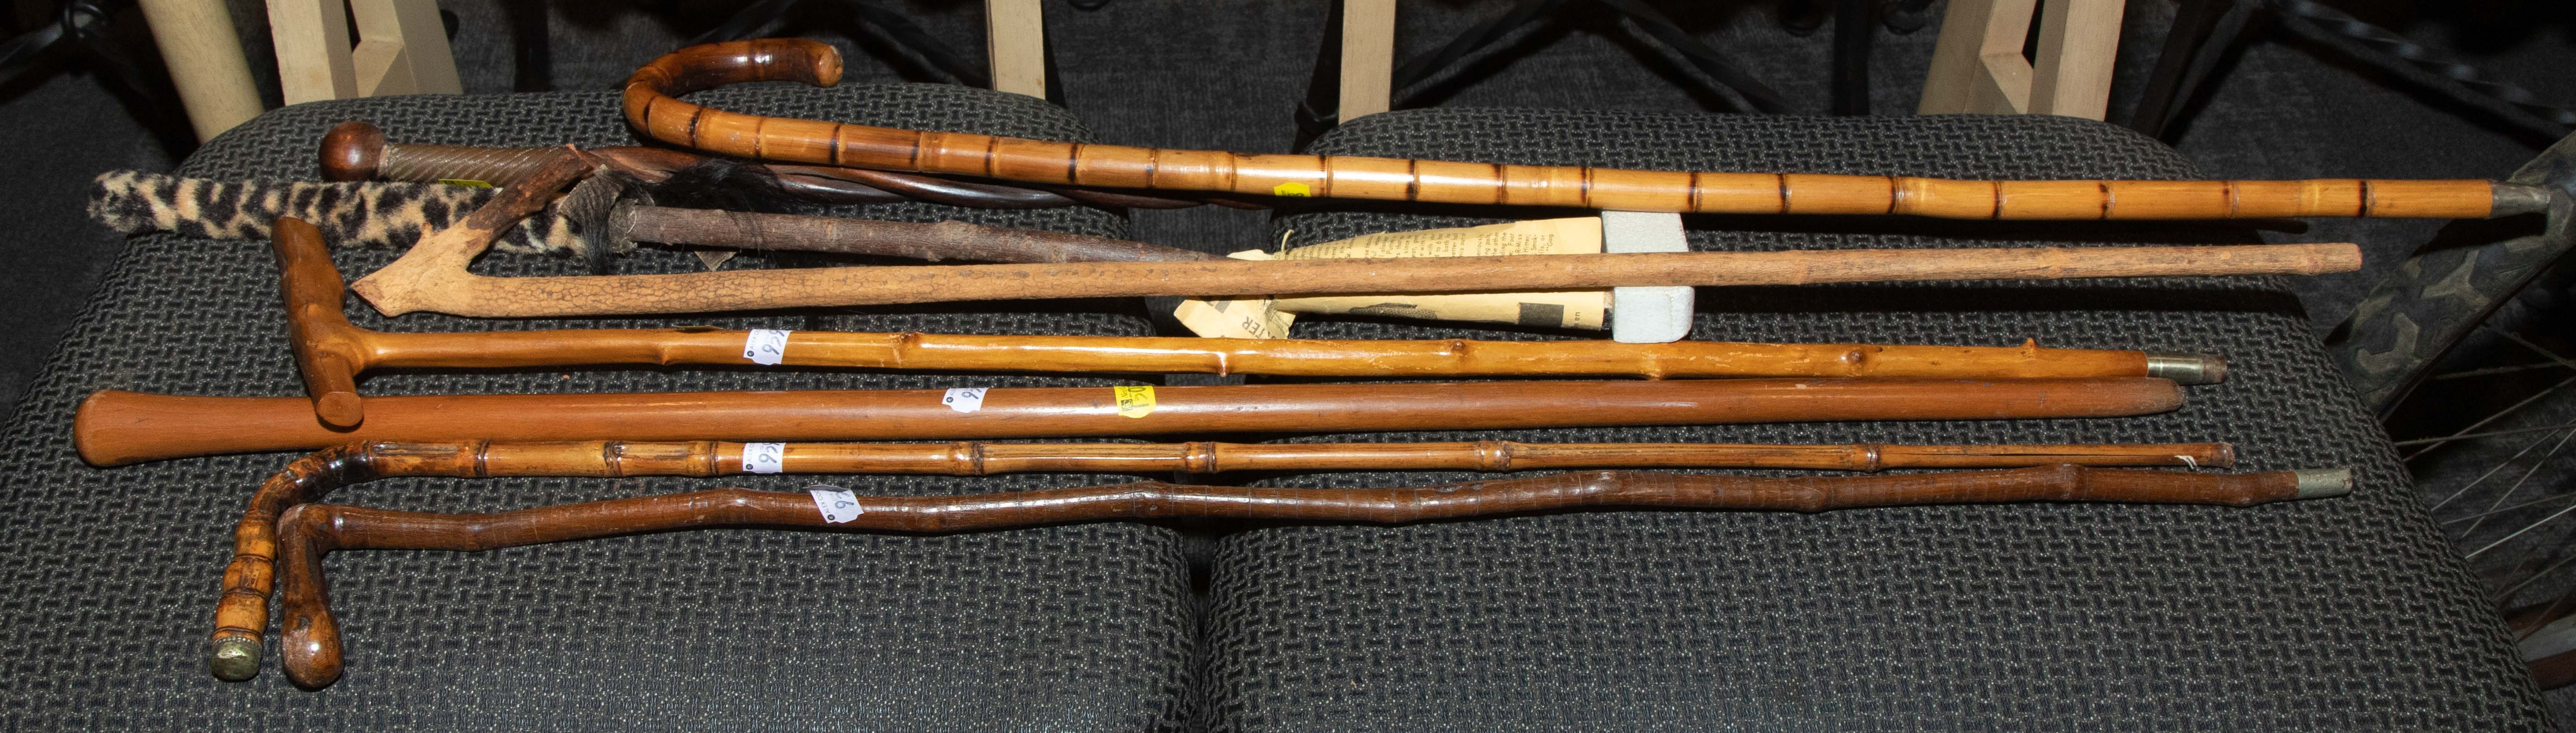 EIGHT CANES & WALKING STICKS Most,